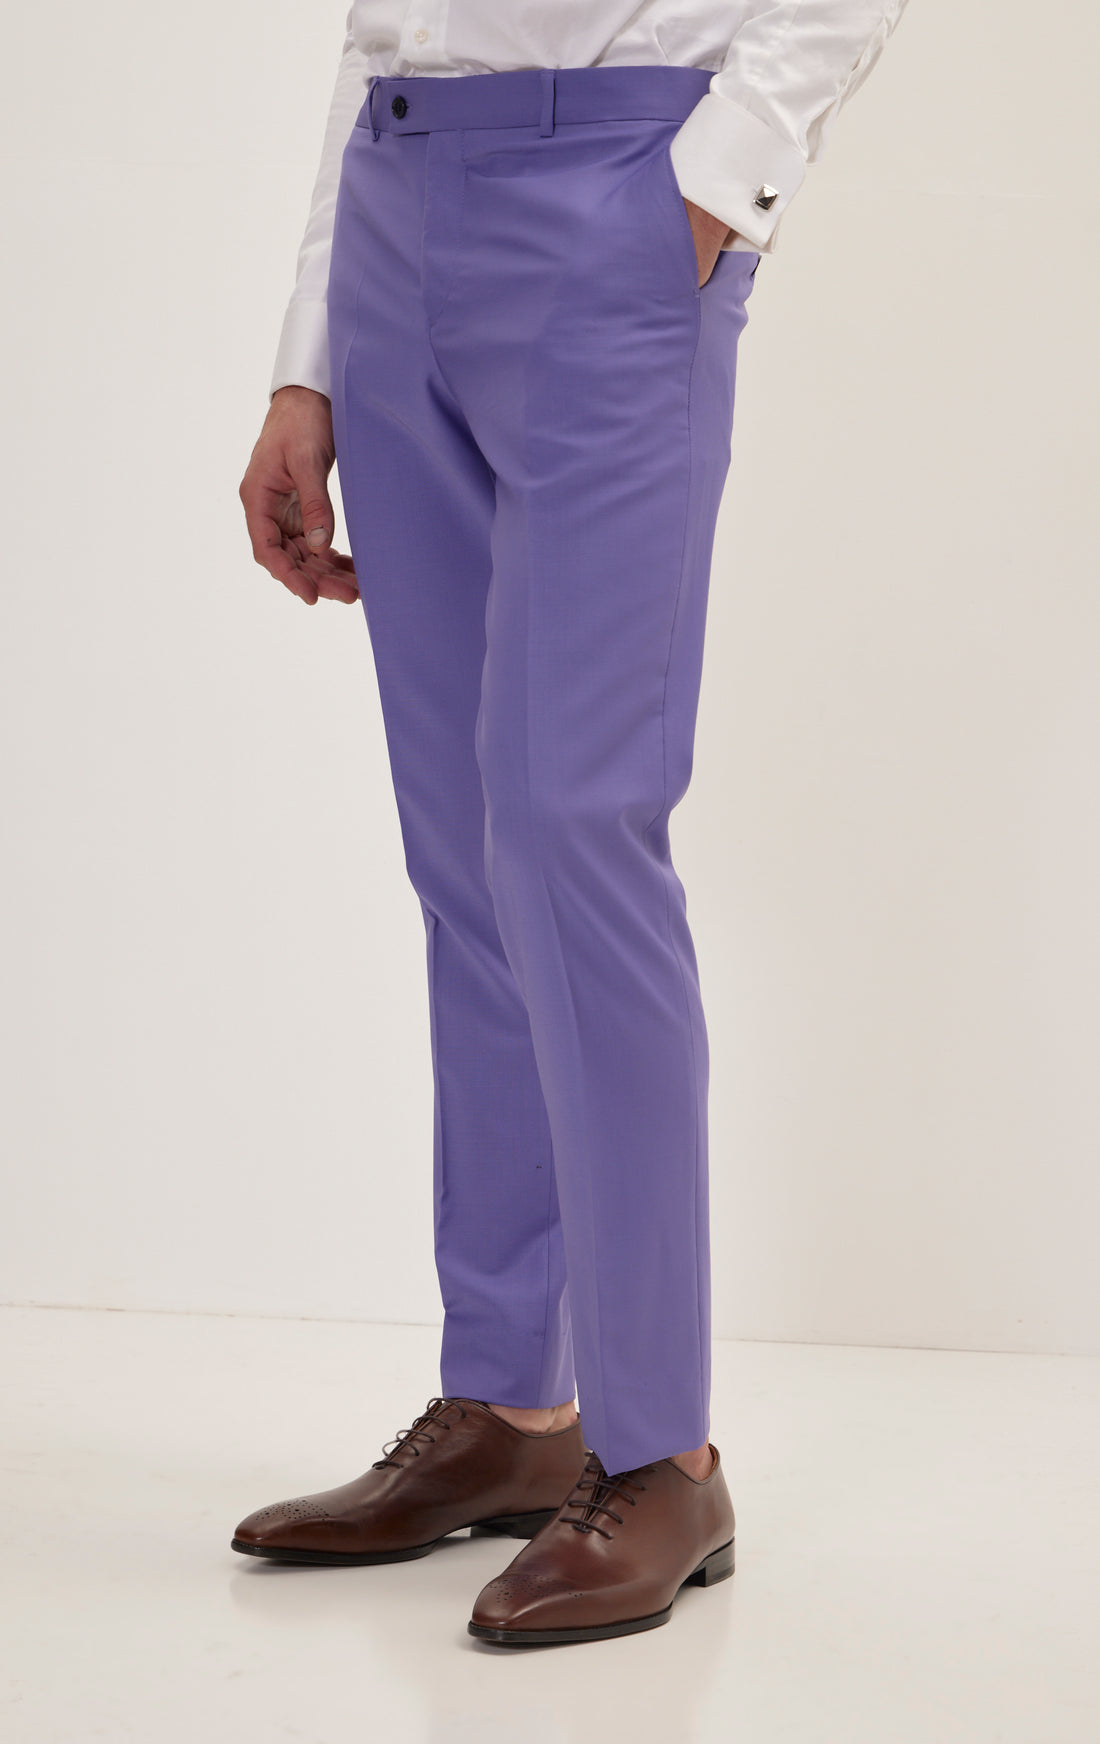 Super 120S Merino Wool Double Breasted Suit - Violet